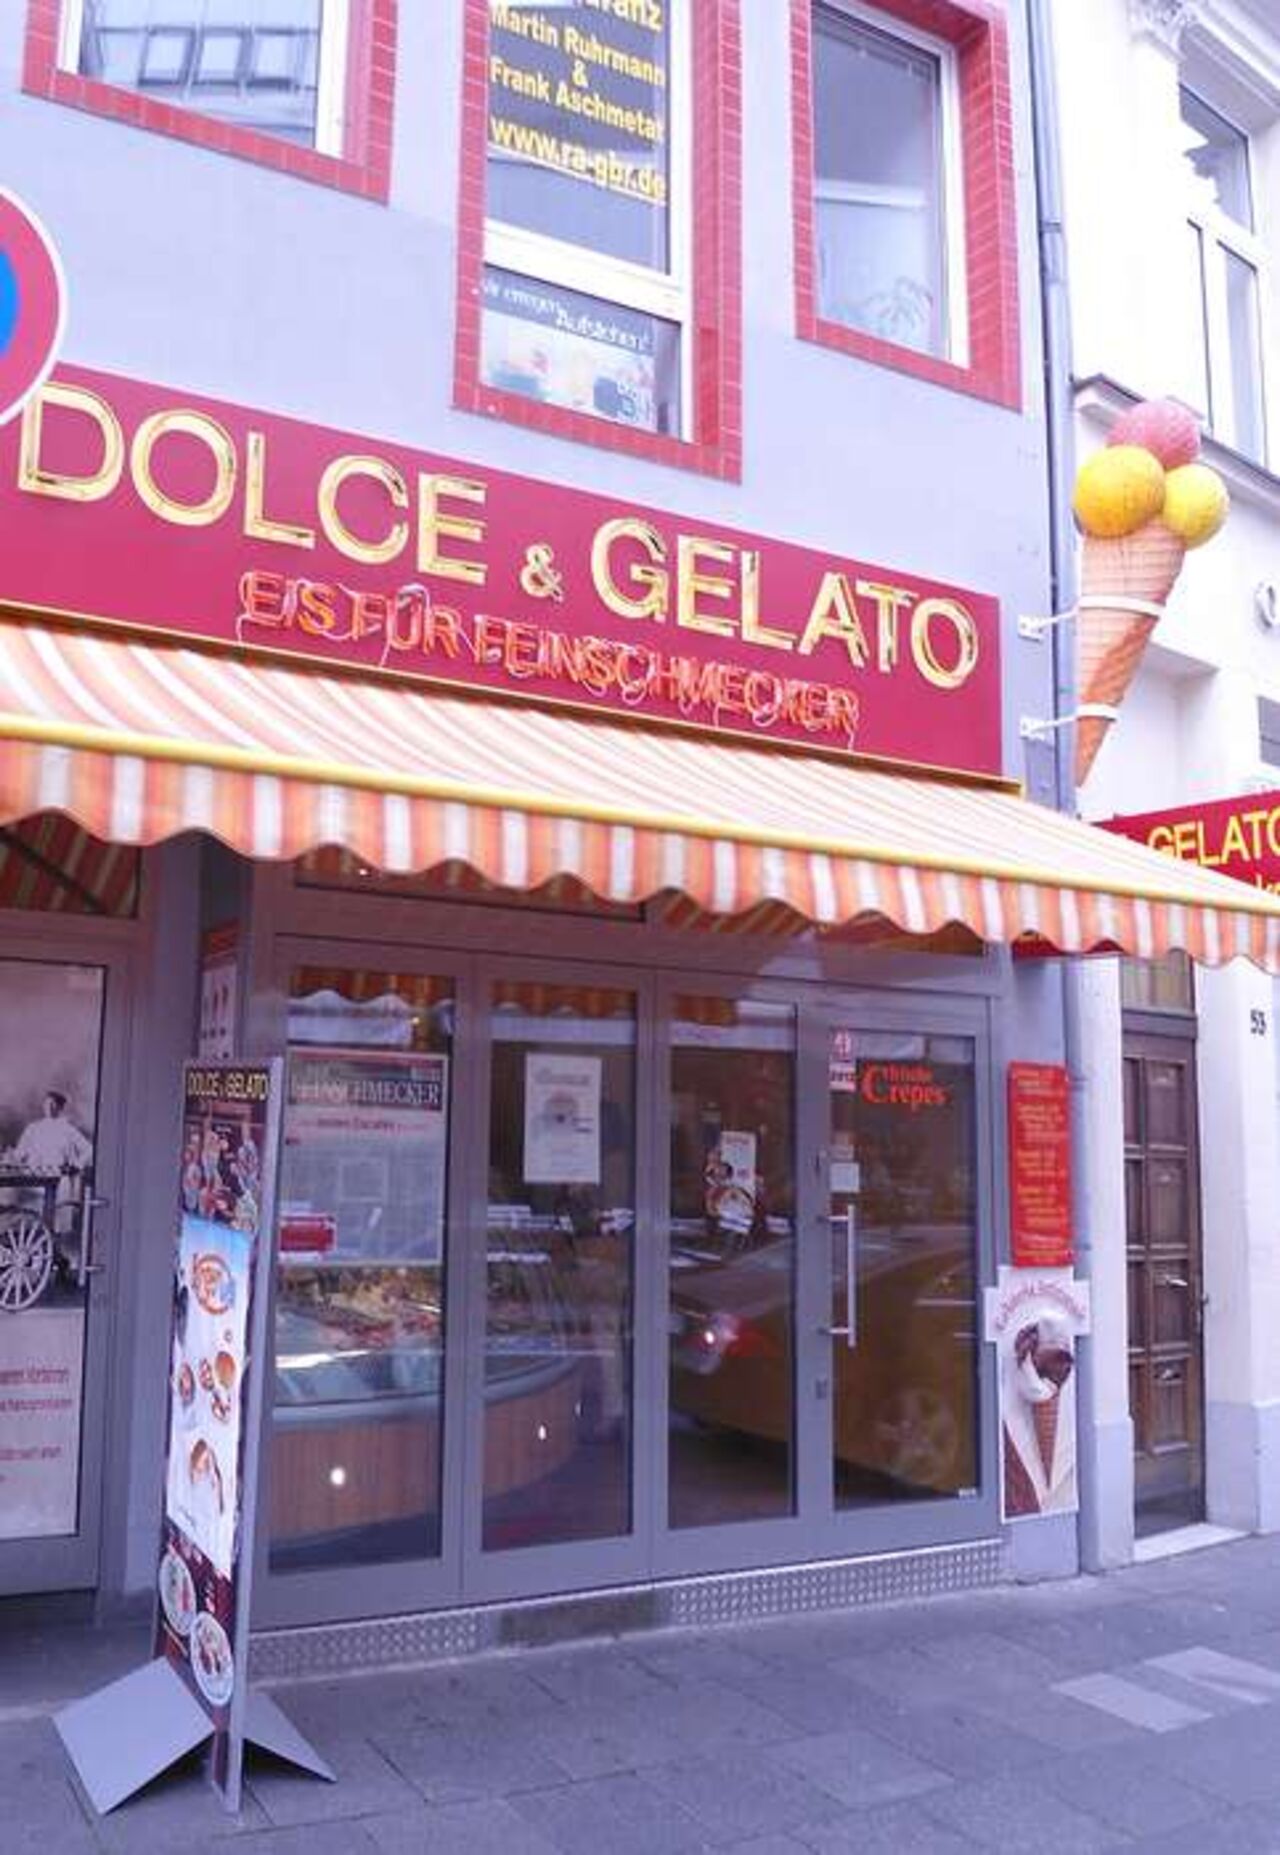 A photo of Dolce & Gelato